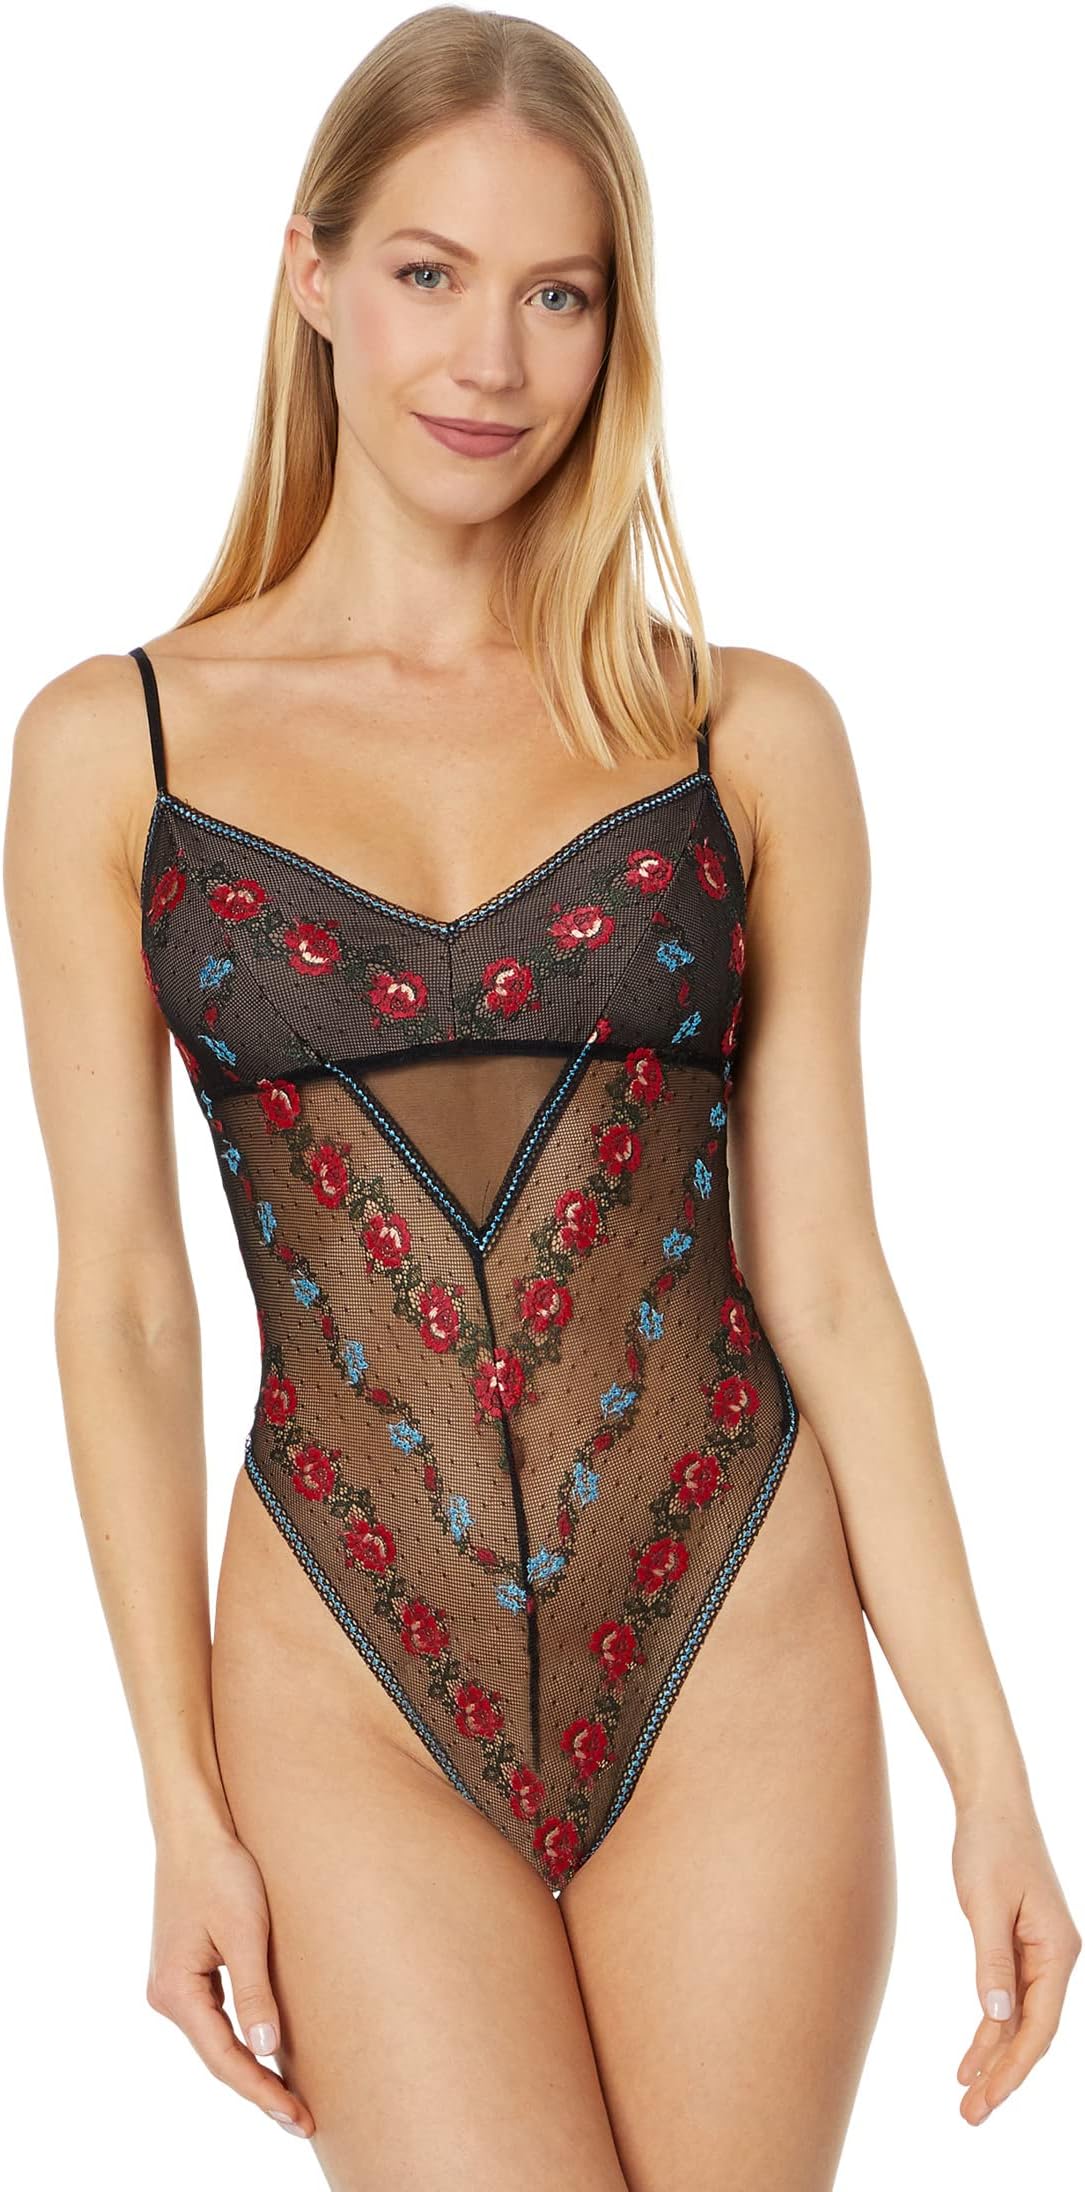 Боди Beatrix Embroidered Chevron Body Only Hearts, цвет Embroidered Roses